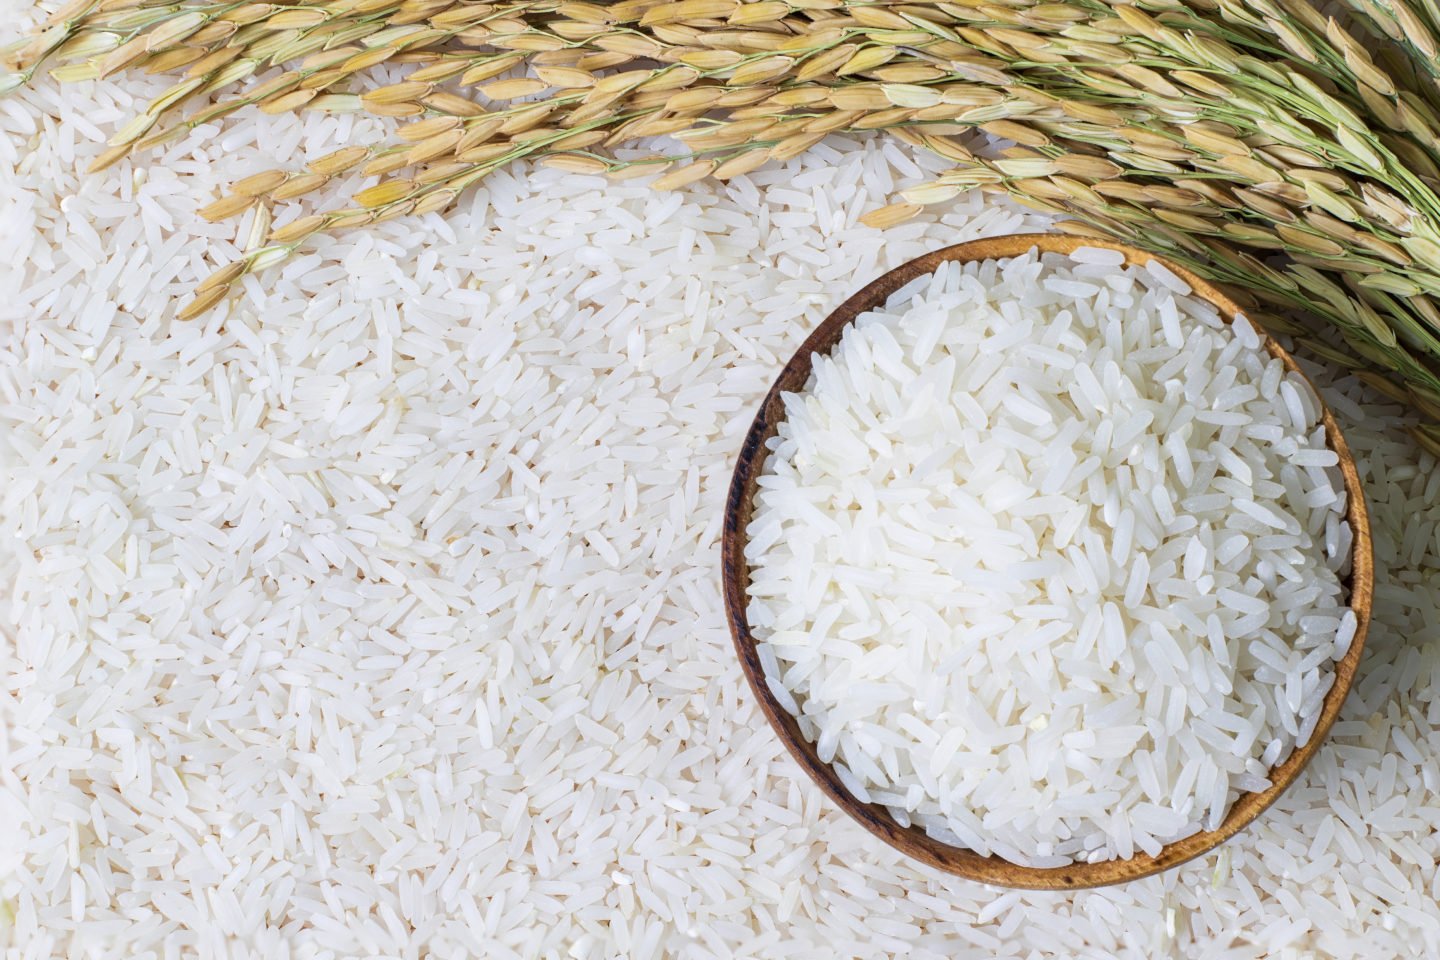 Uncooked Rice In Wooden Bowl And Surface